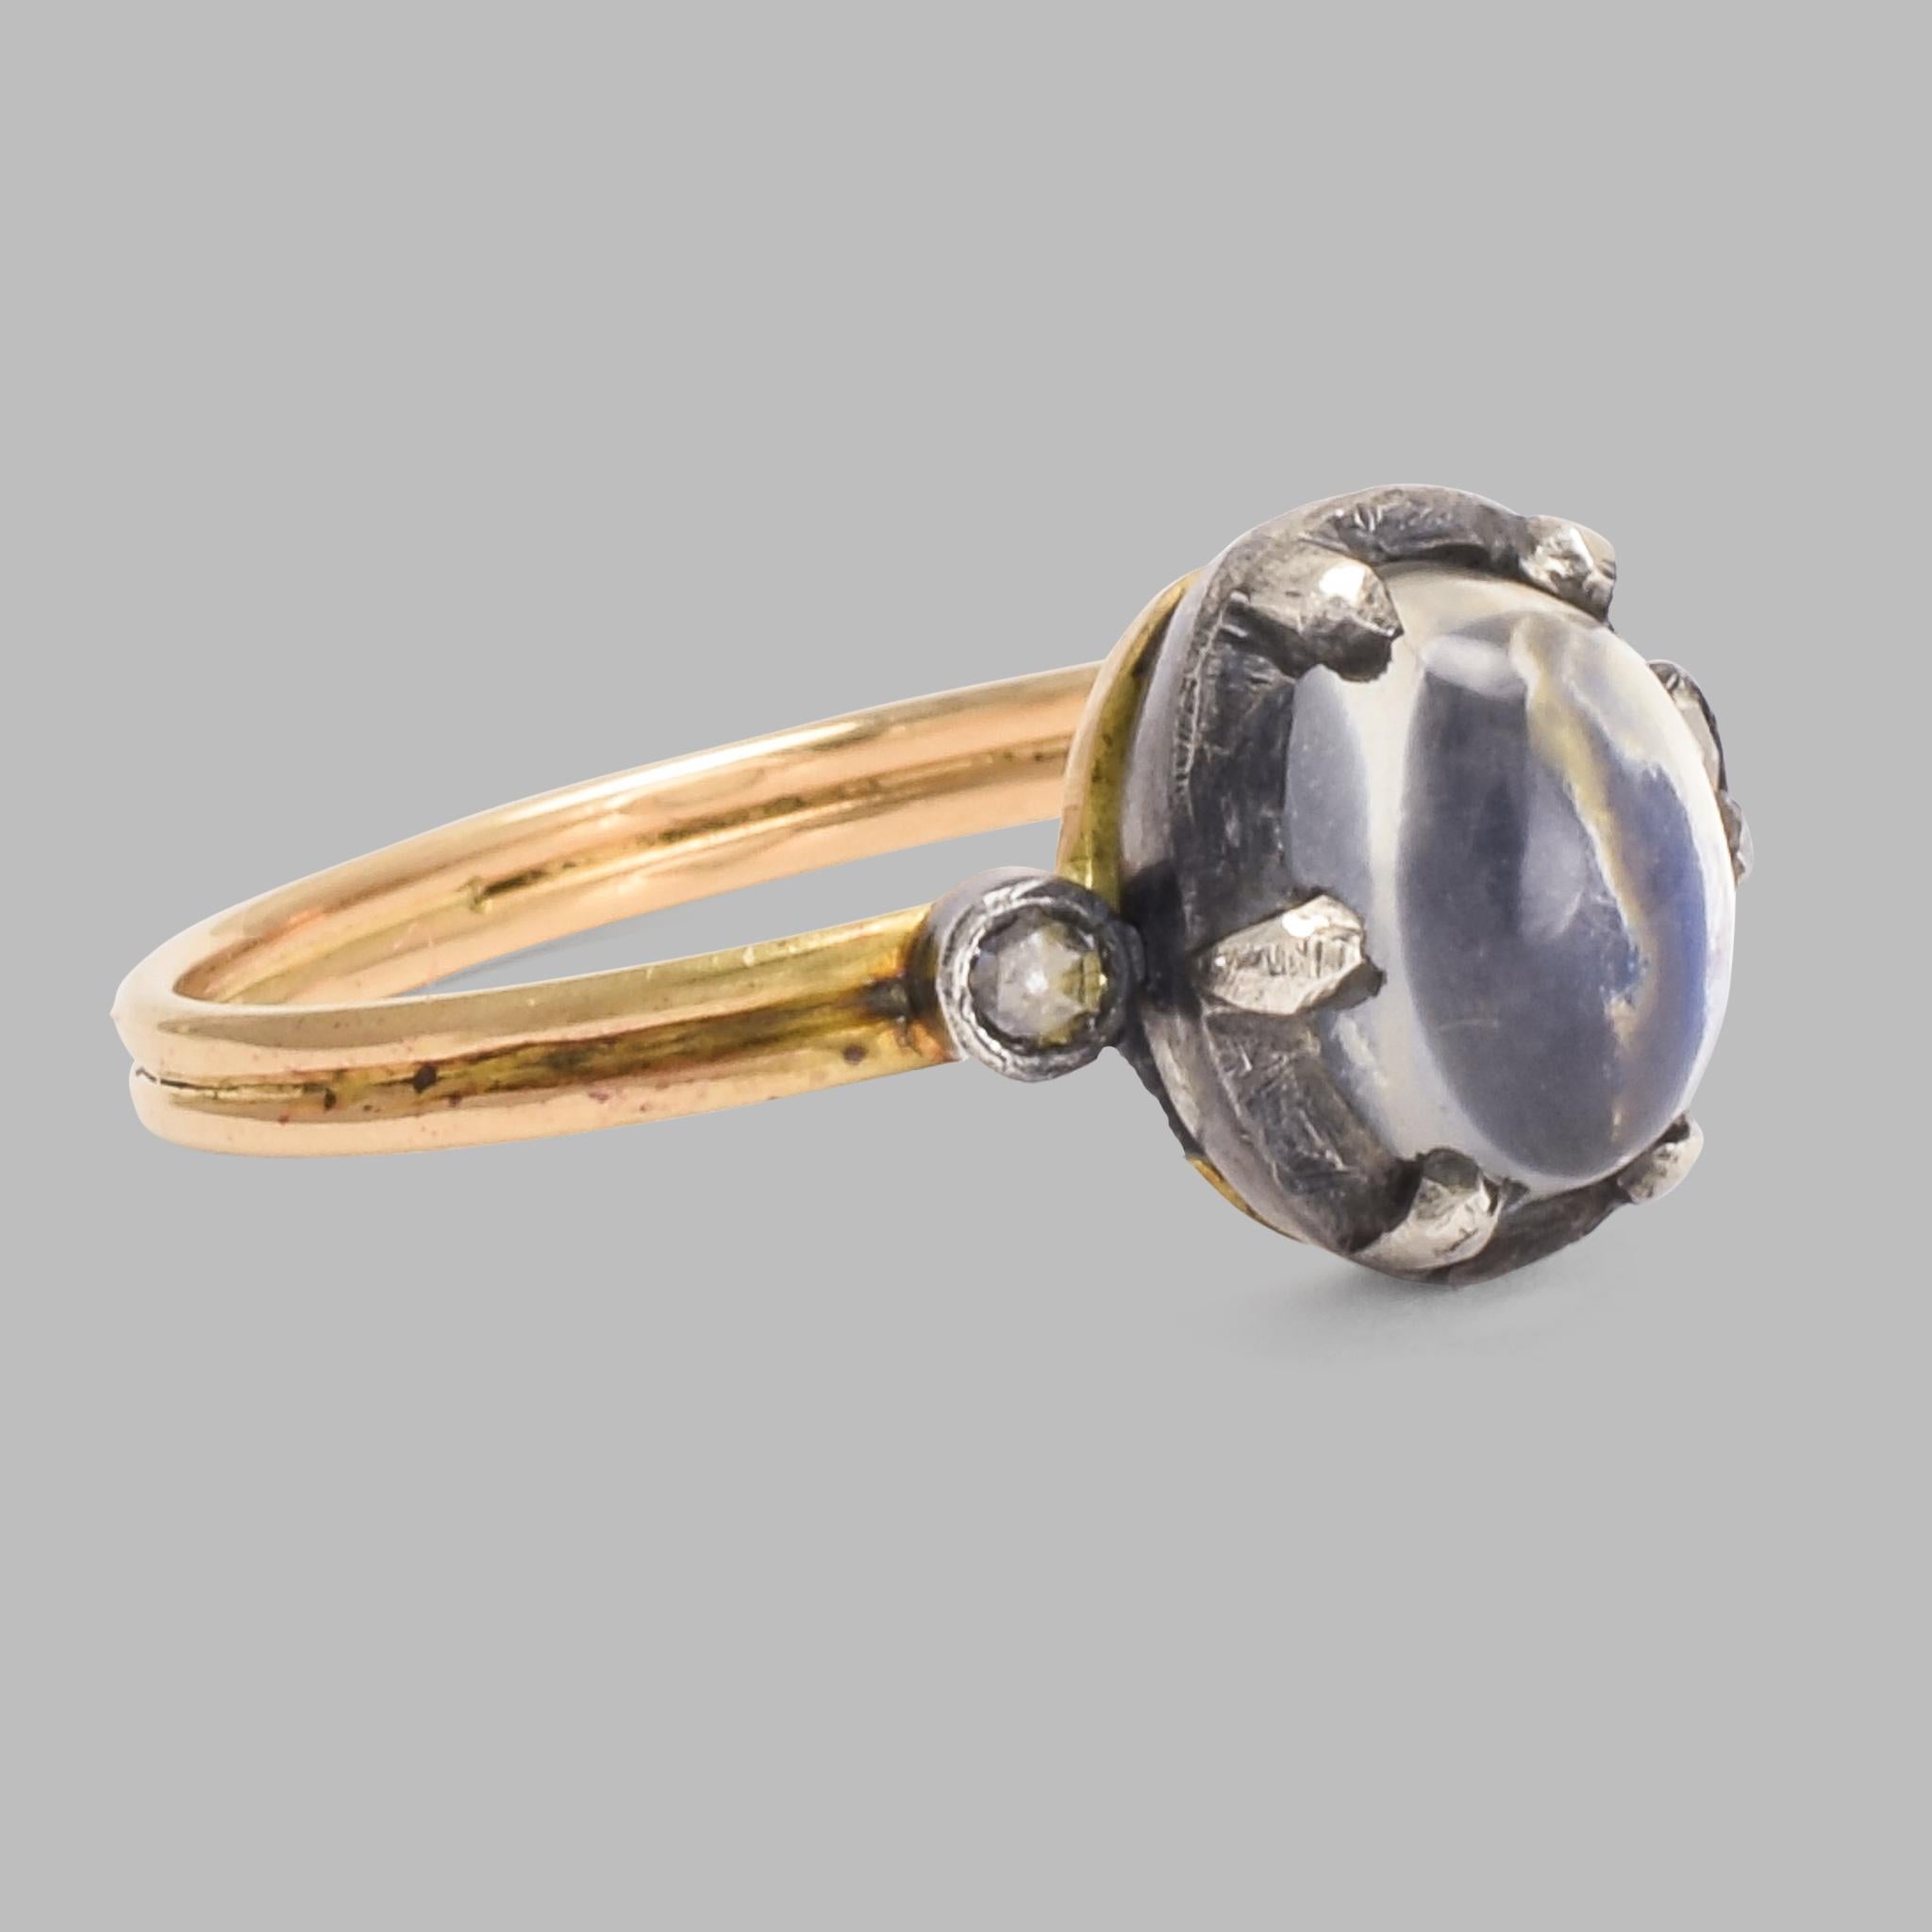 BL Bespoke Collection

Power and Balance. Blue magic glows from the depths of the moonstone, while sparks of pure energy dance over the diamonds. 

The focal point of this ring is a mysterious blue moonstone. The shimmering, hazy blue light within